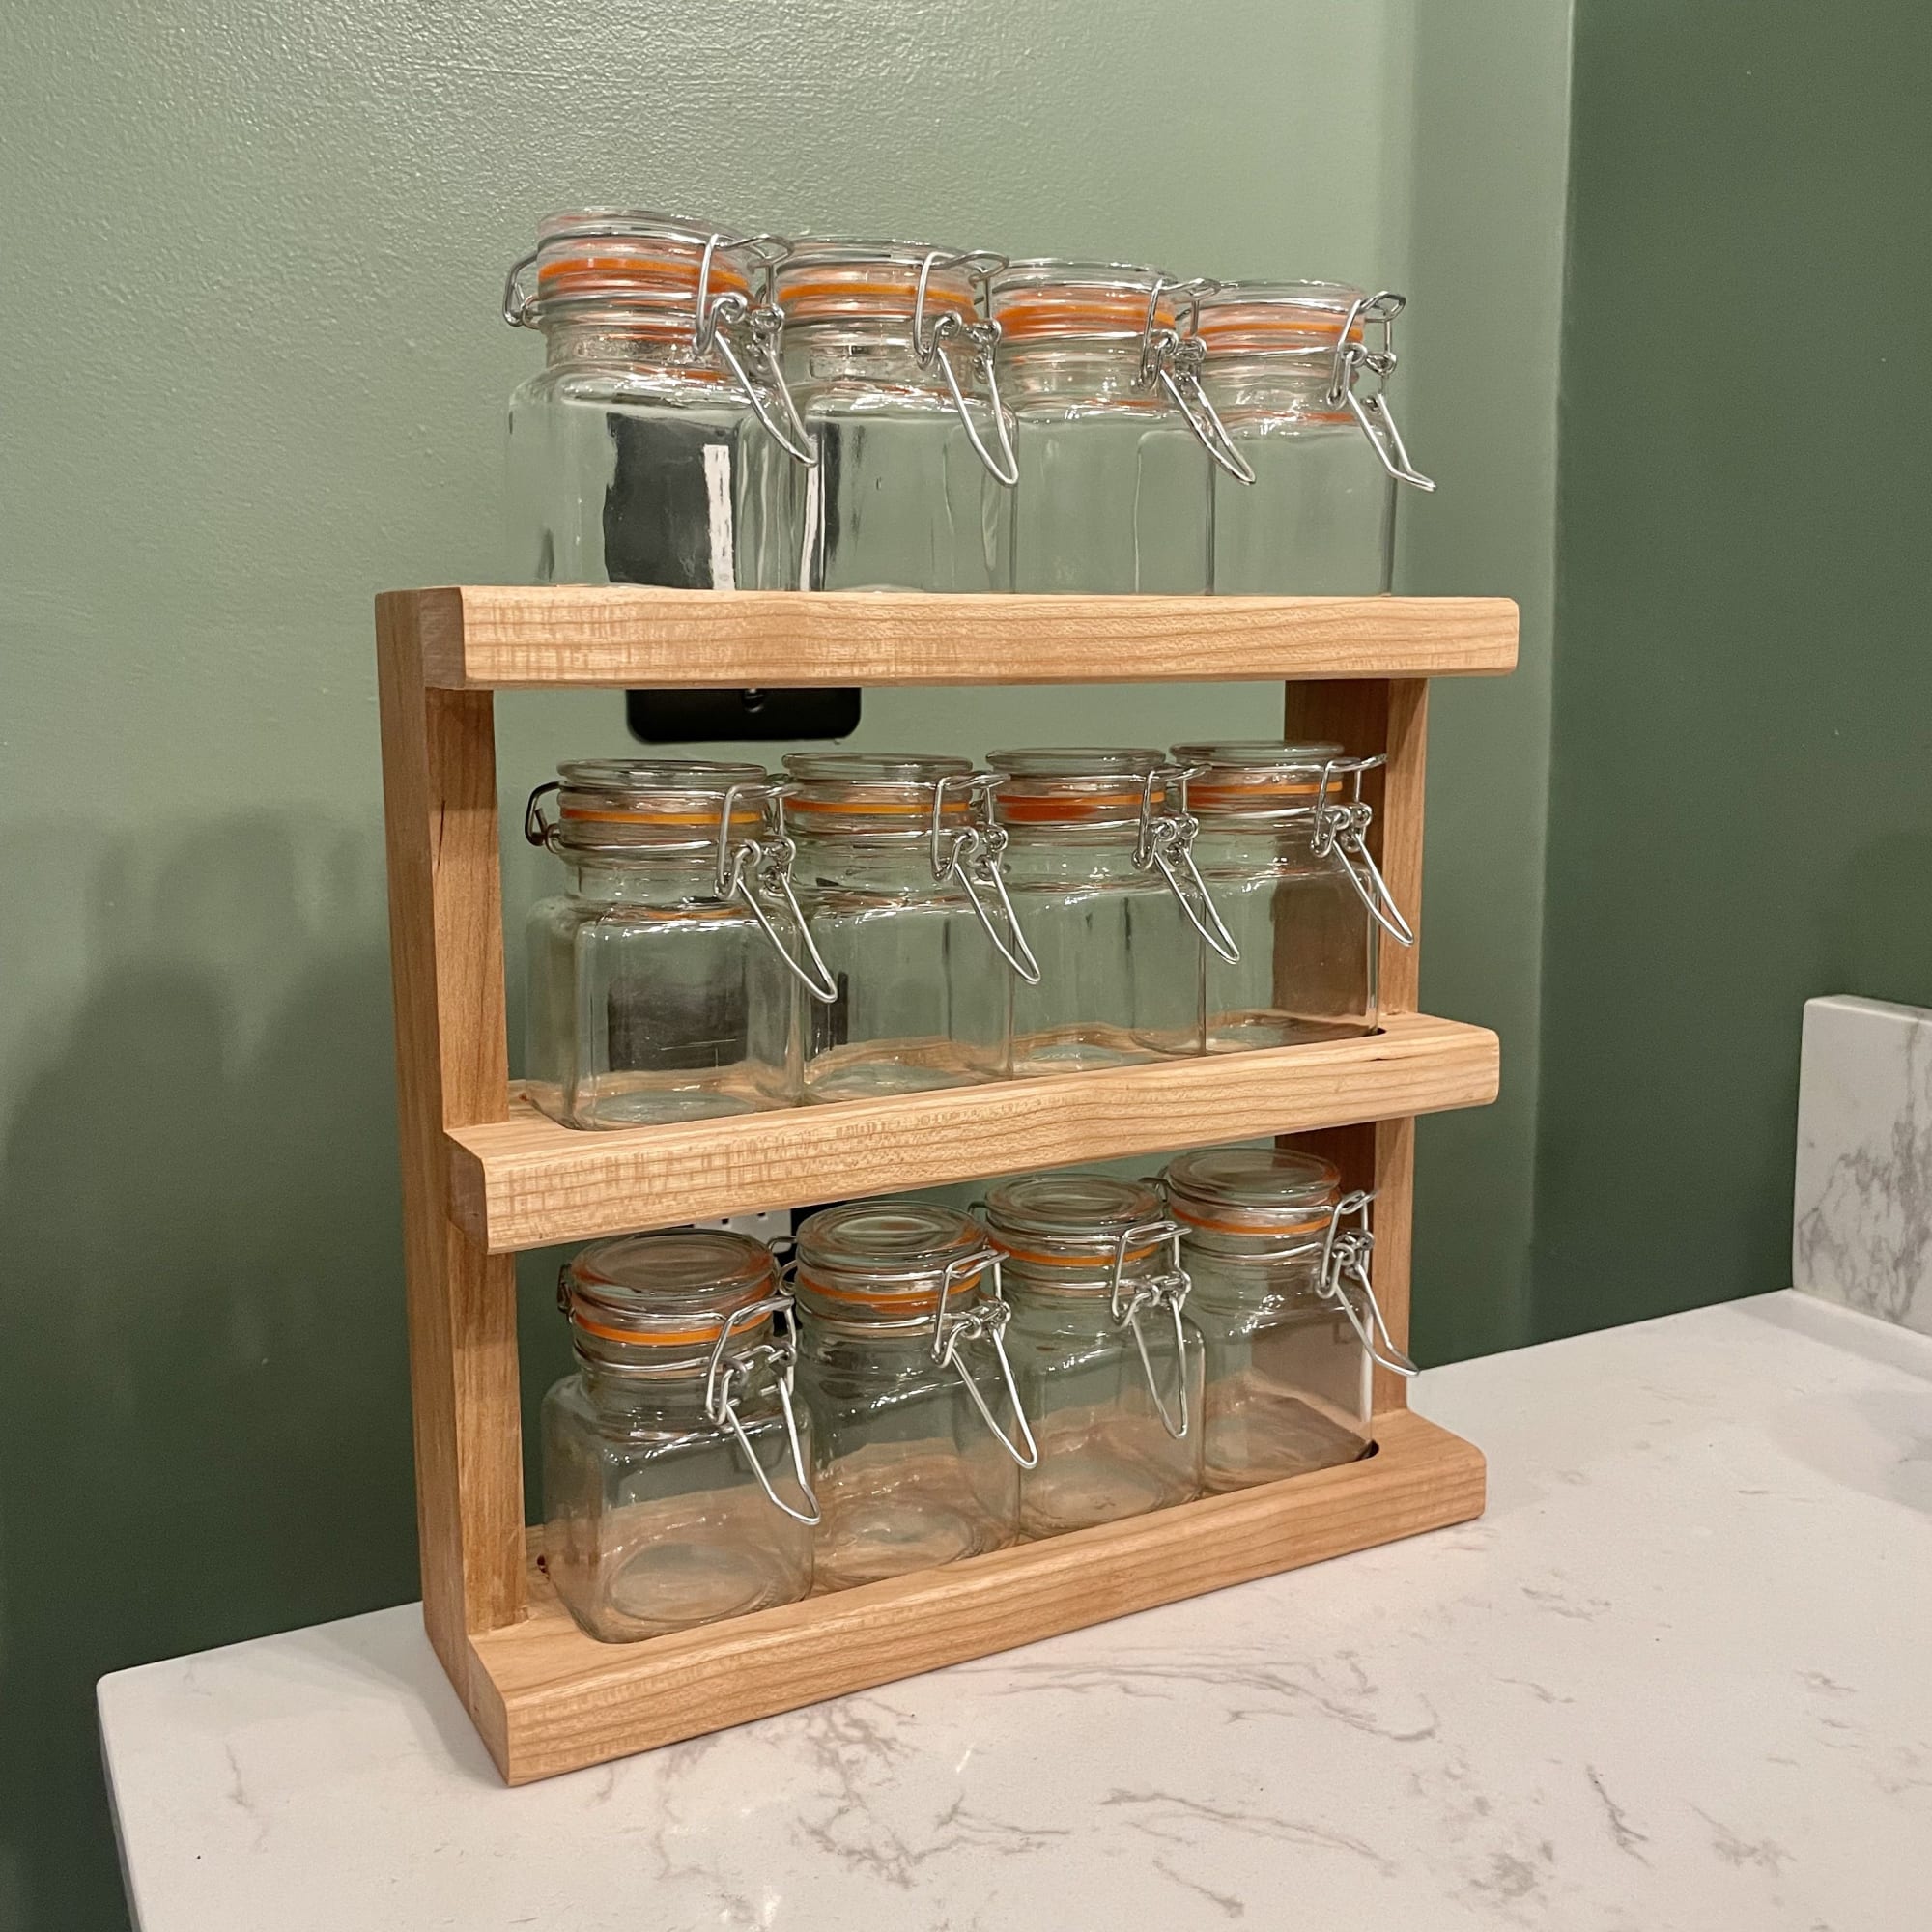 Chef's Spice Rack w/ 24 Glass Jars - in Sapele/Mahogany by